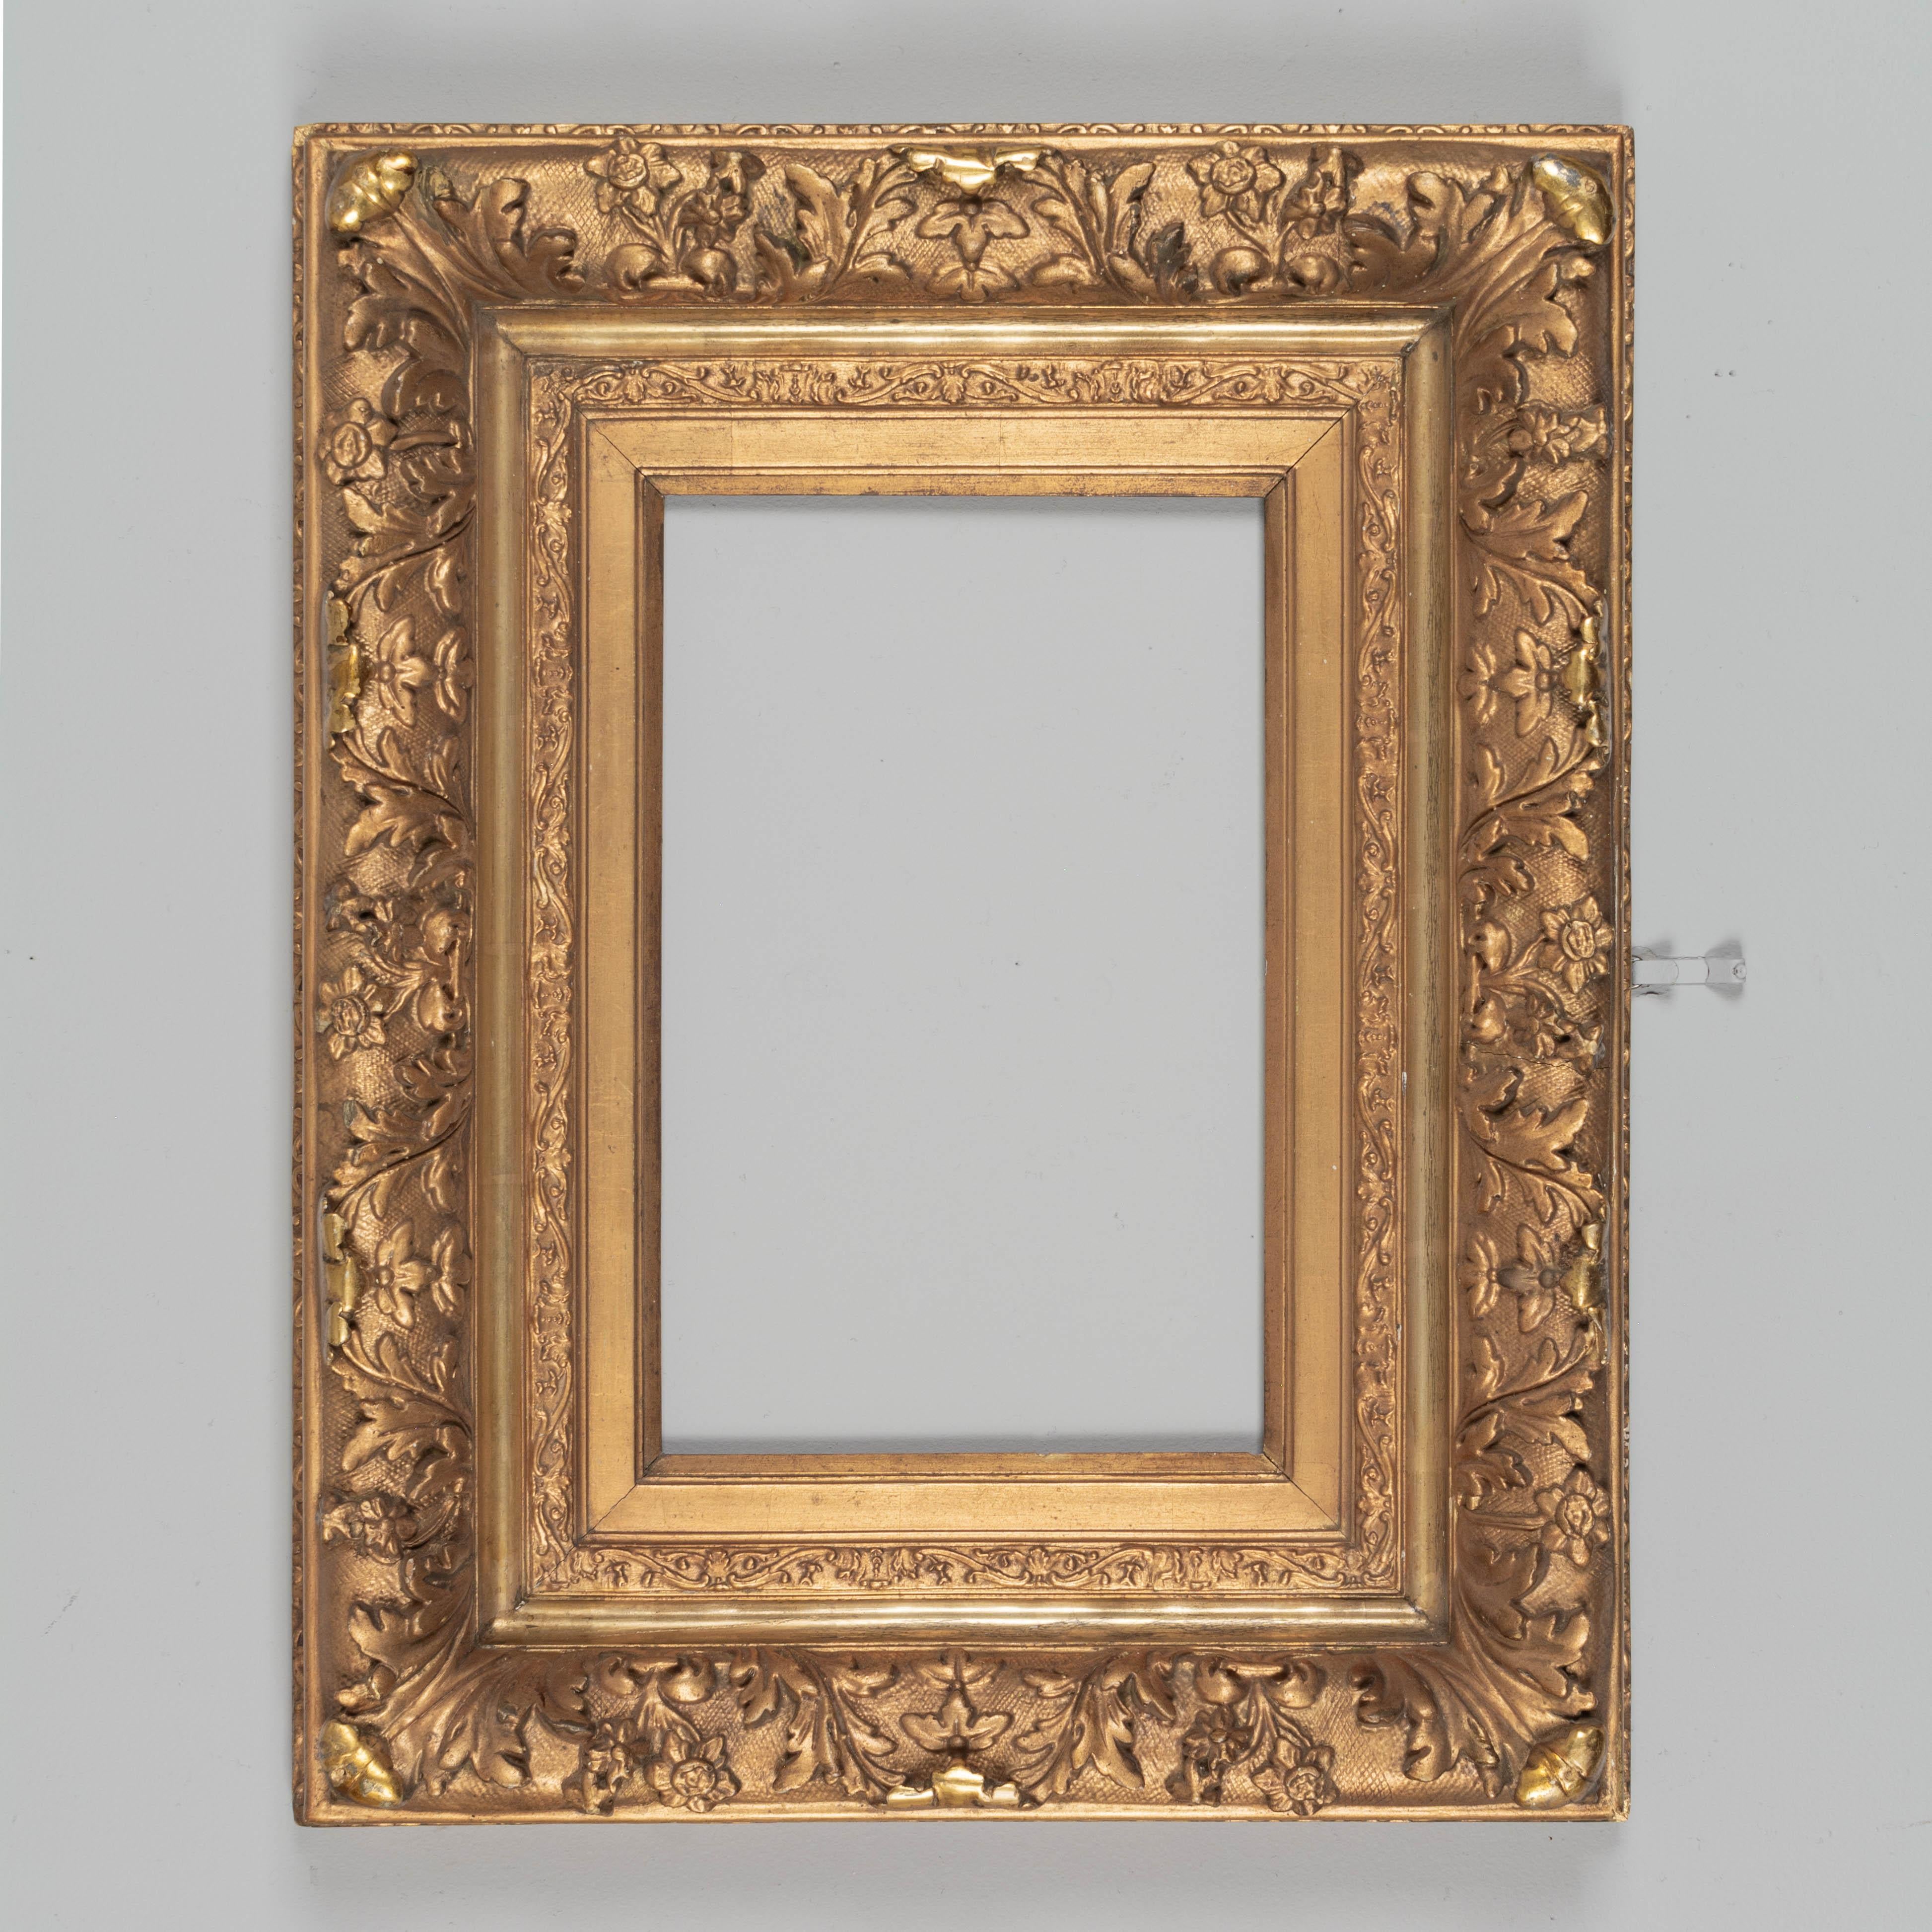 A 19th Century French Beaux Arts gilt wood picture frame. Fine quality heavy gilded molding. Very good condition with minor losses.  Nice scale for use as a mirror frame. Circa 1880-1900.
Outside dimensions: 26.5